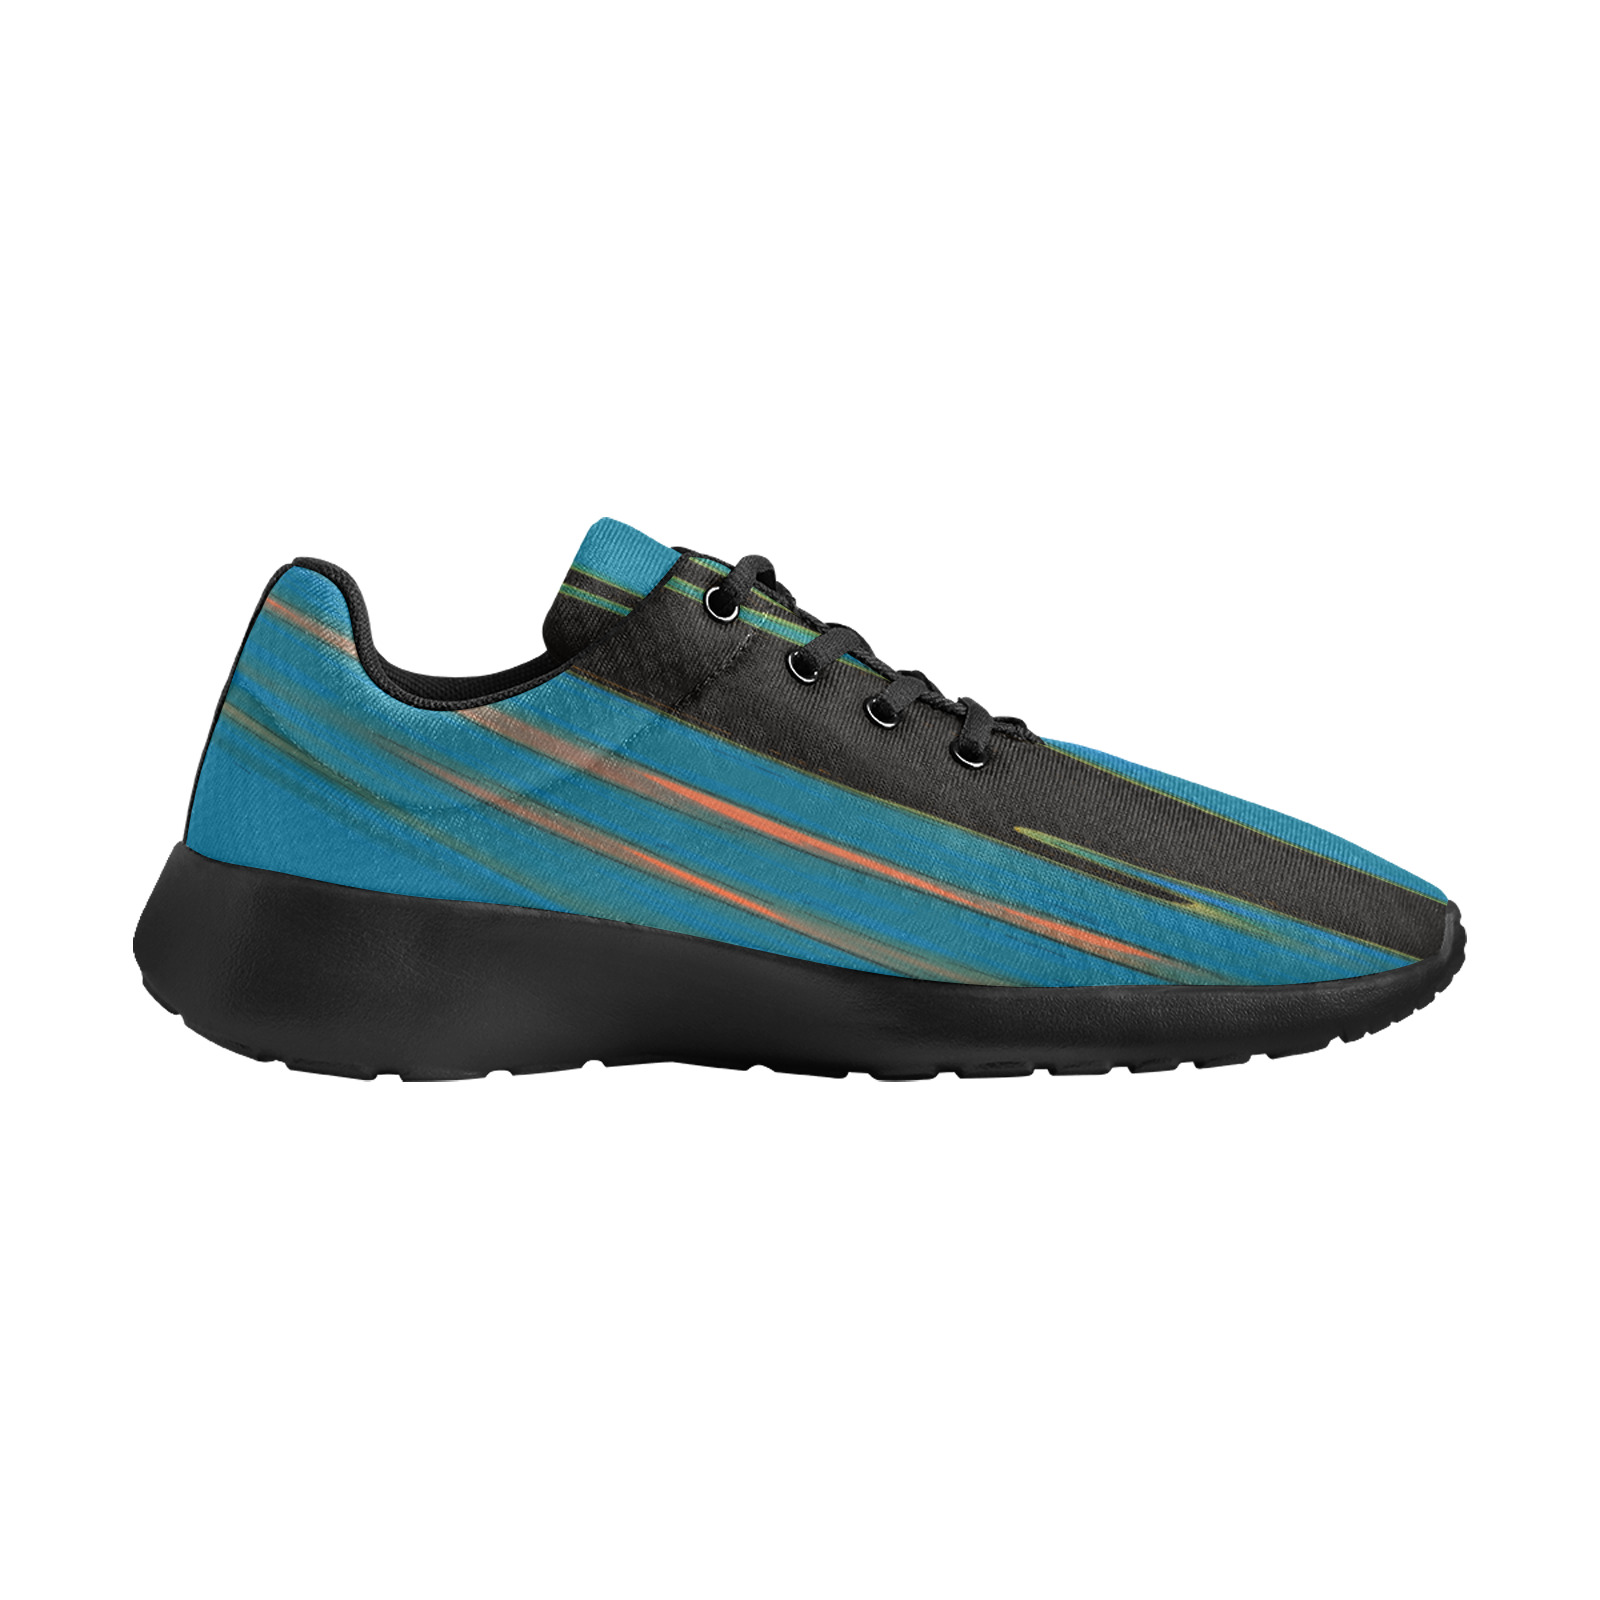 Black Turquoise And Orange Go! Abstract Art Men's Athletic Shoes (Model 0200)